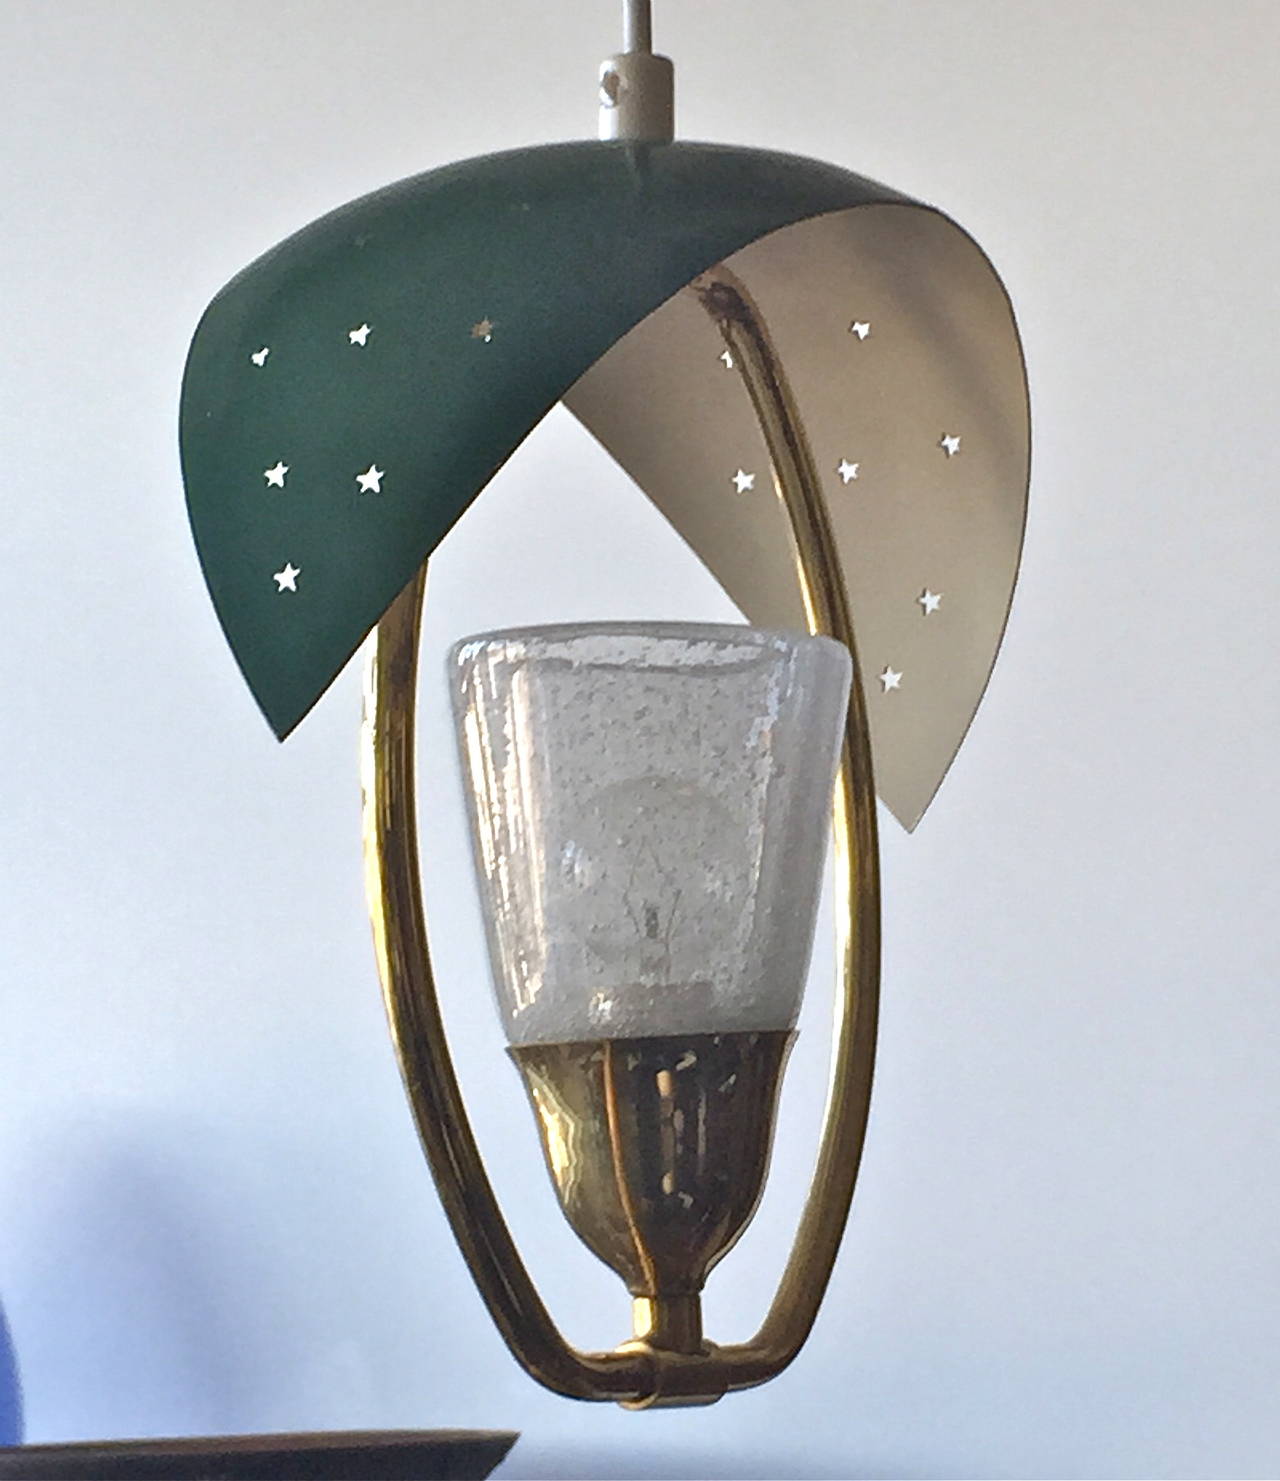 A pendant, by Valinte Oy, Finland, circa mid-20th century.
Perforated enameled shade, brass frame, glass lampshade.
H 11